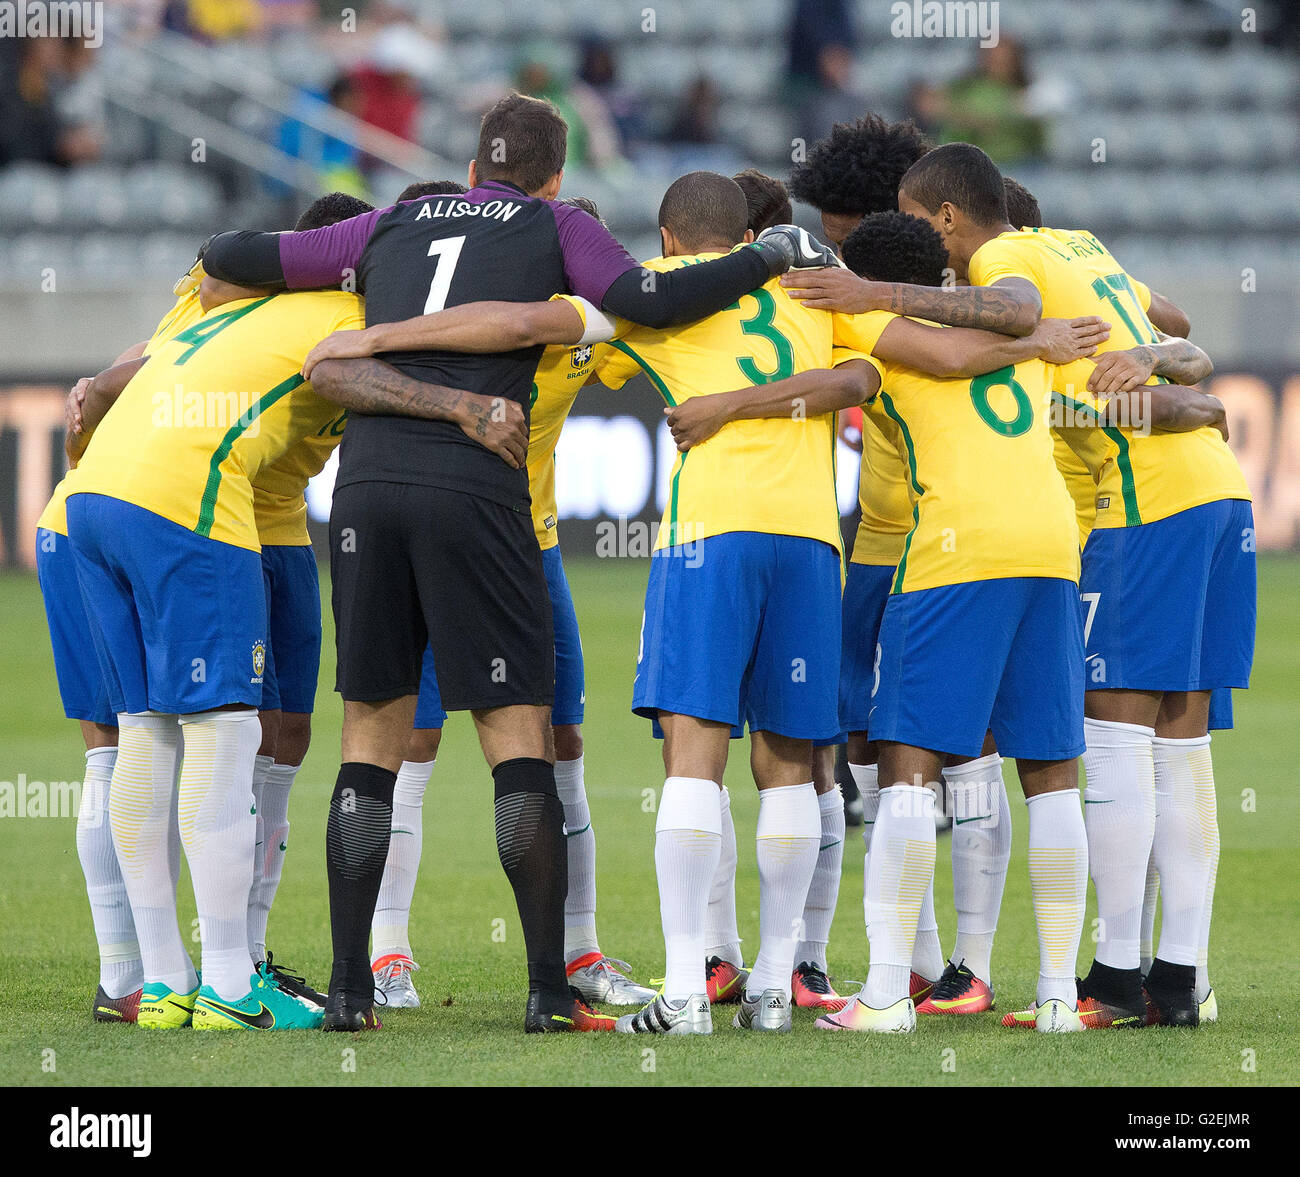 Commerce City, Colorado, USA. 29th May, 2016. Brazil starters hurdle up before the start of the game during a friendly match against Panama before the Copa de Oro at Dicks Sporting Goods Park Sunday Evening. Brazil beats Panama 2-0. Credit:  Hector Acevedo/ZUMA Wire/Alamy Live News Stock Photo